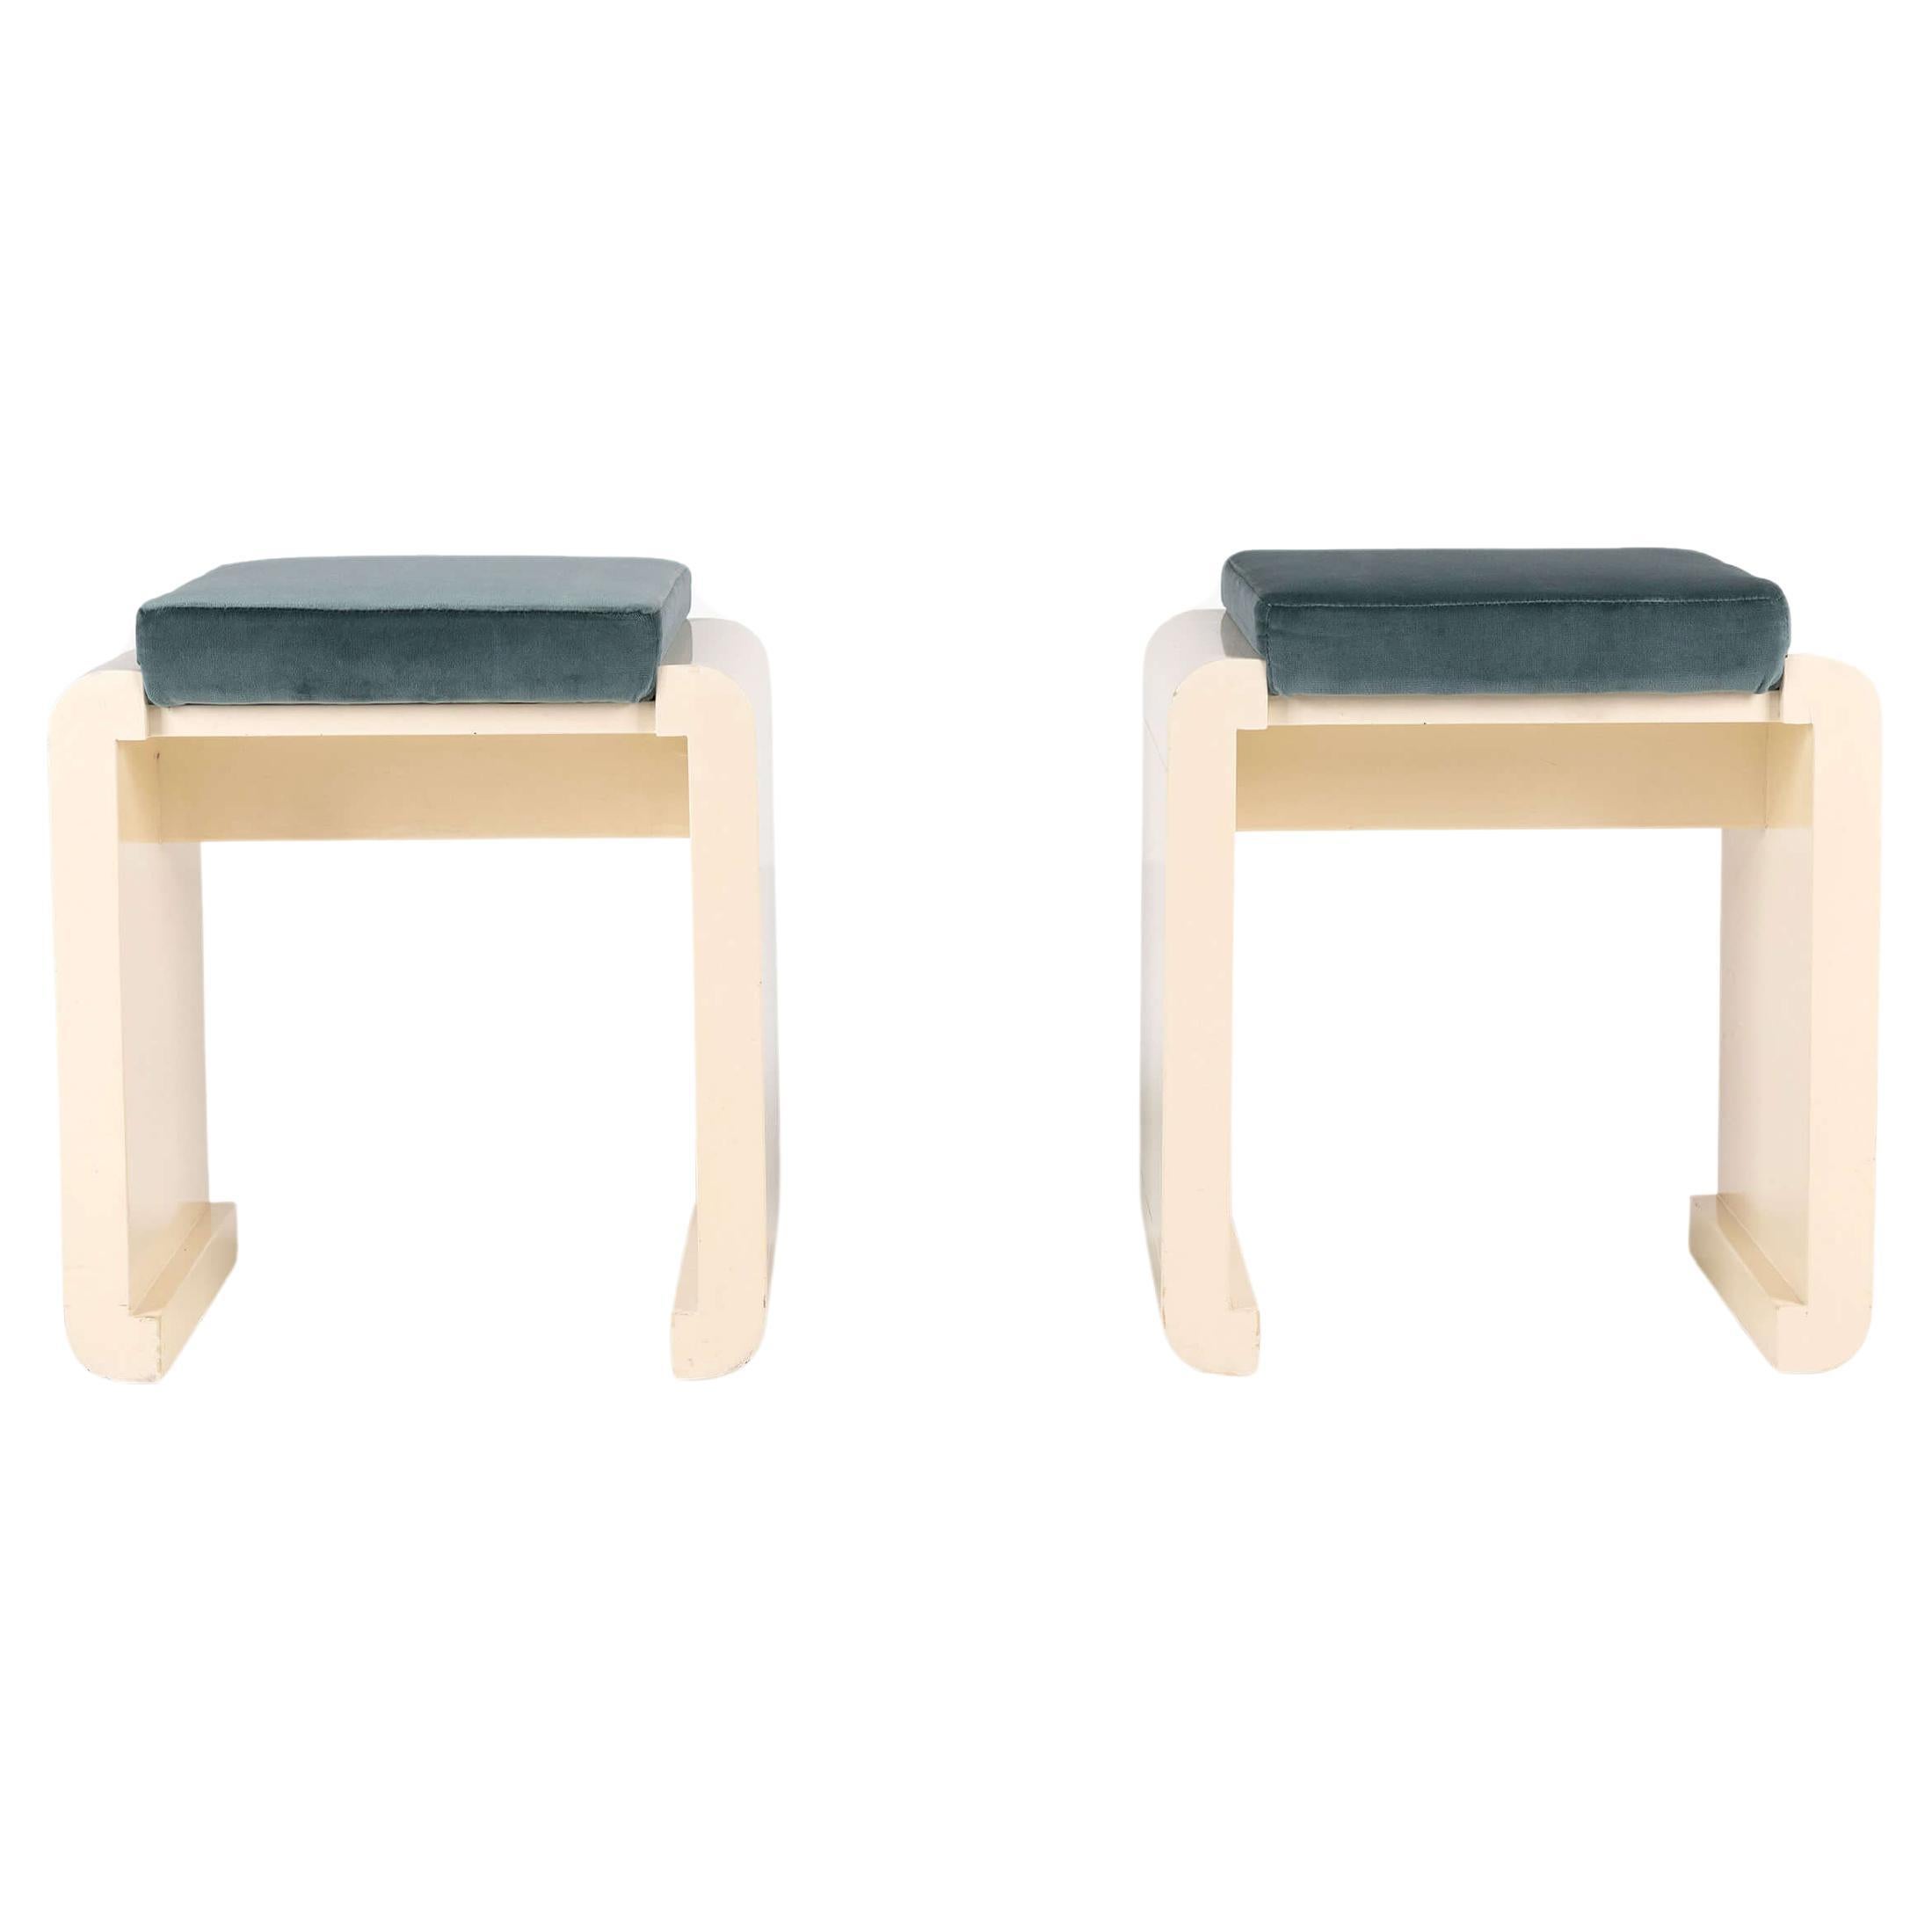 Pair of Italian Creme Lacquered Vanity Stools with Teal Velvet Upholstery